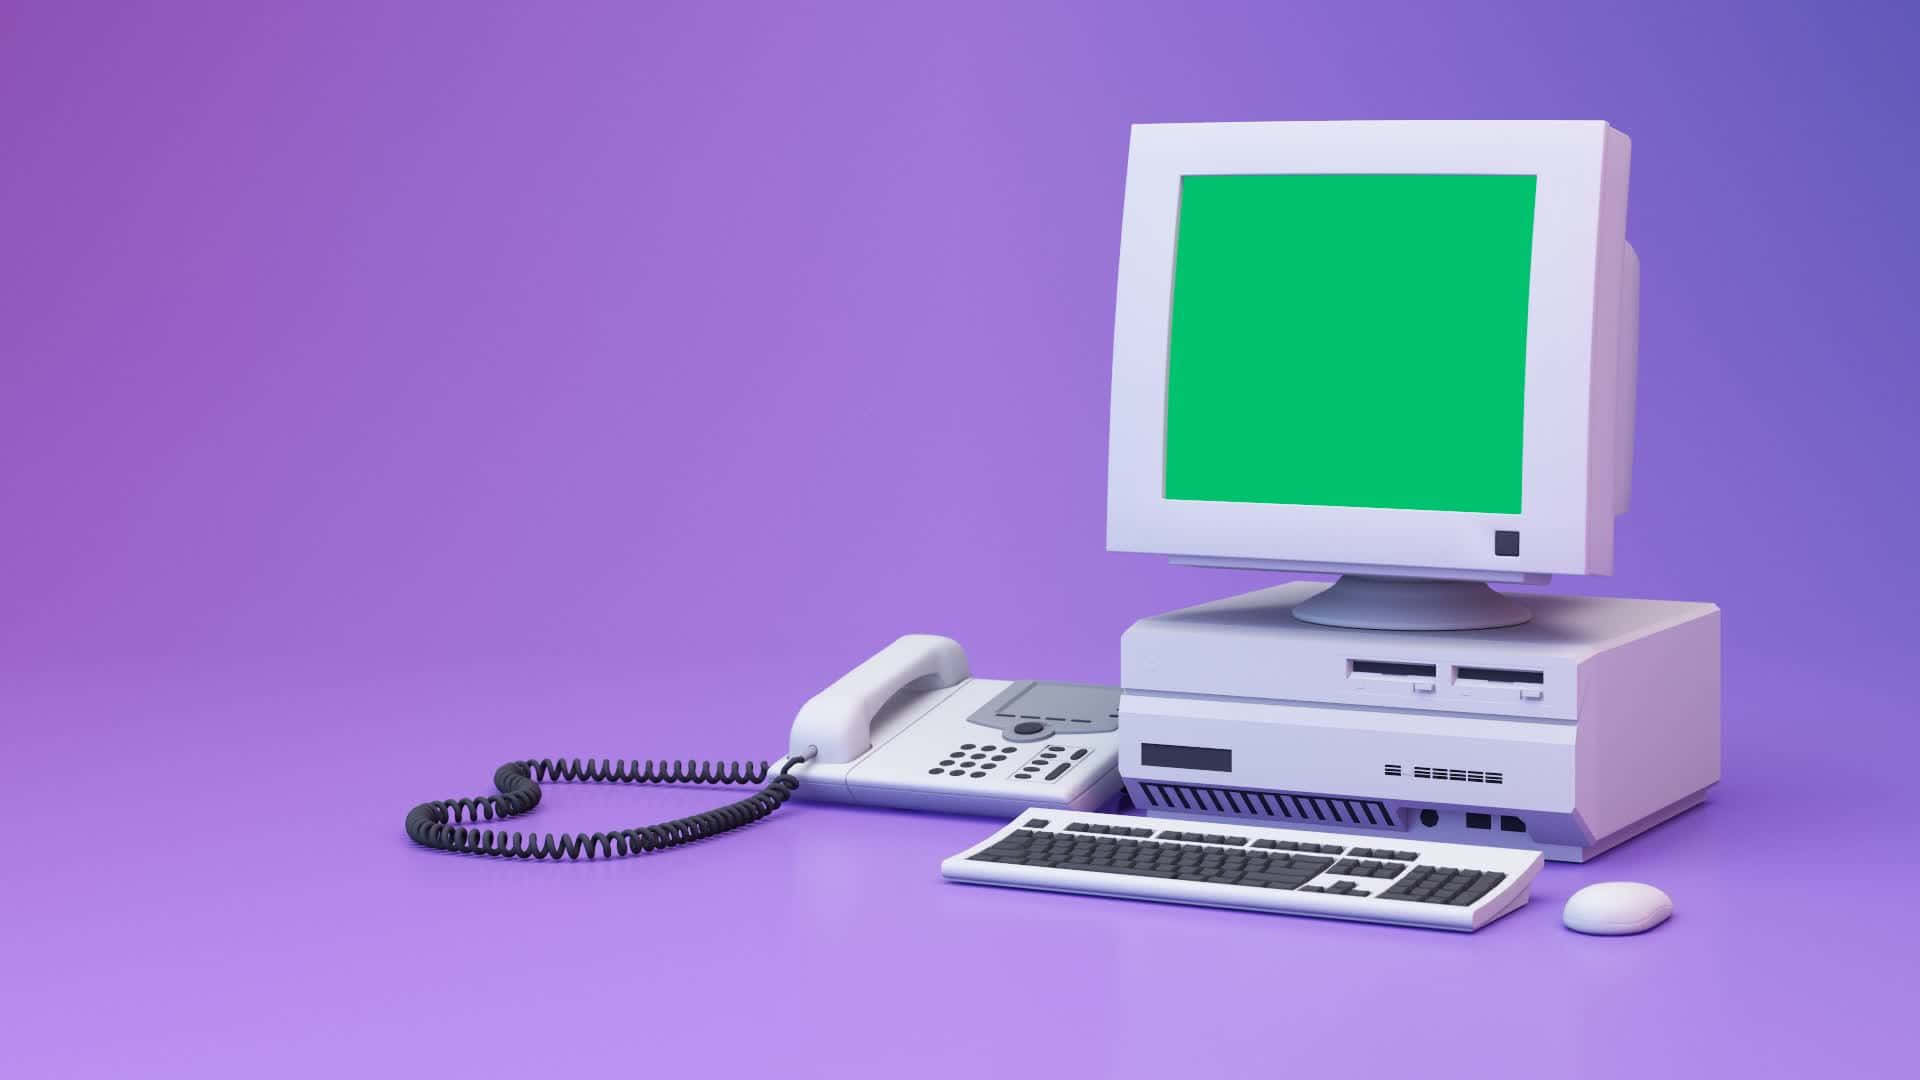 Brighten up your workspace with an aesthetically pleasing desktop computer!